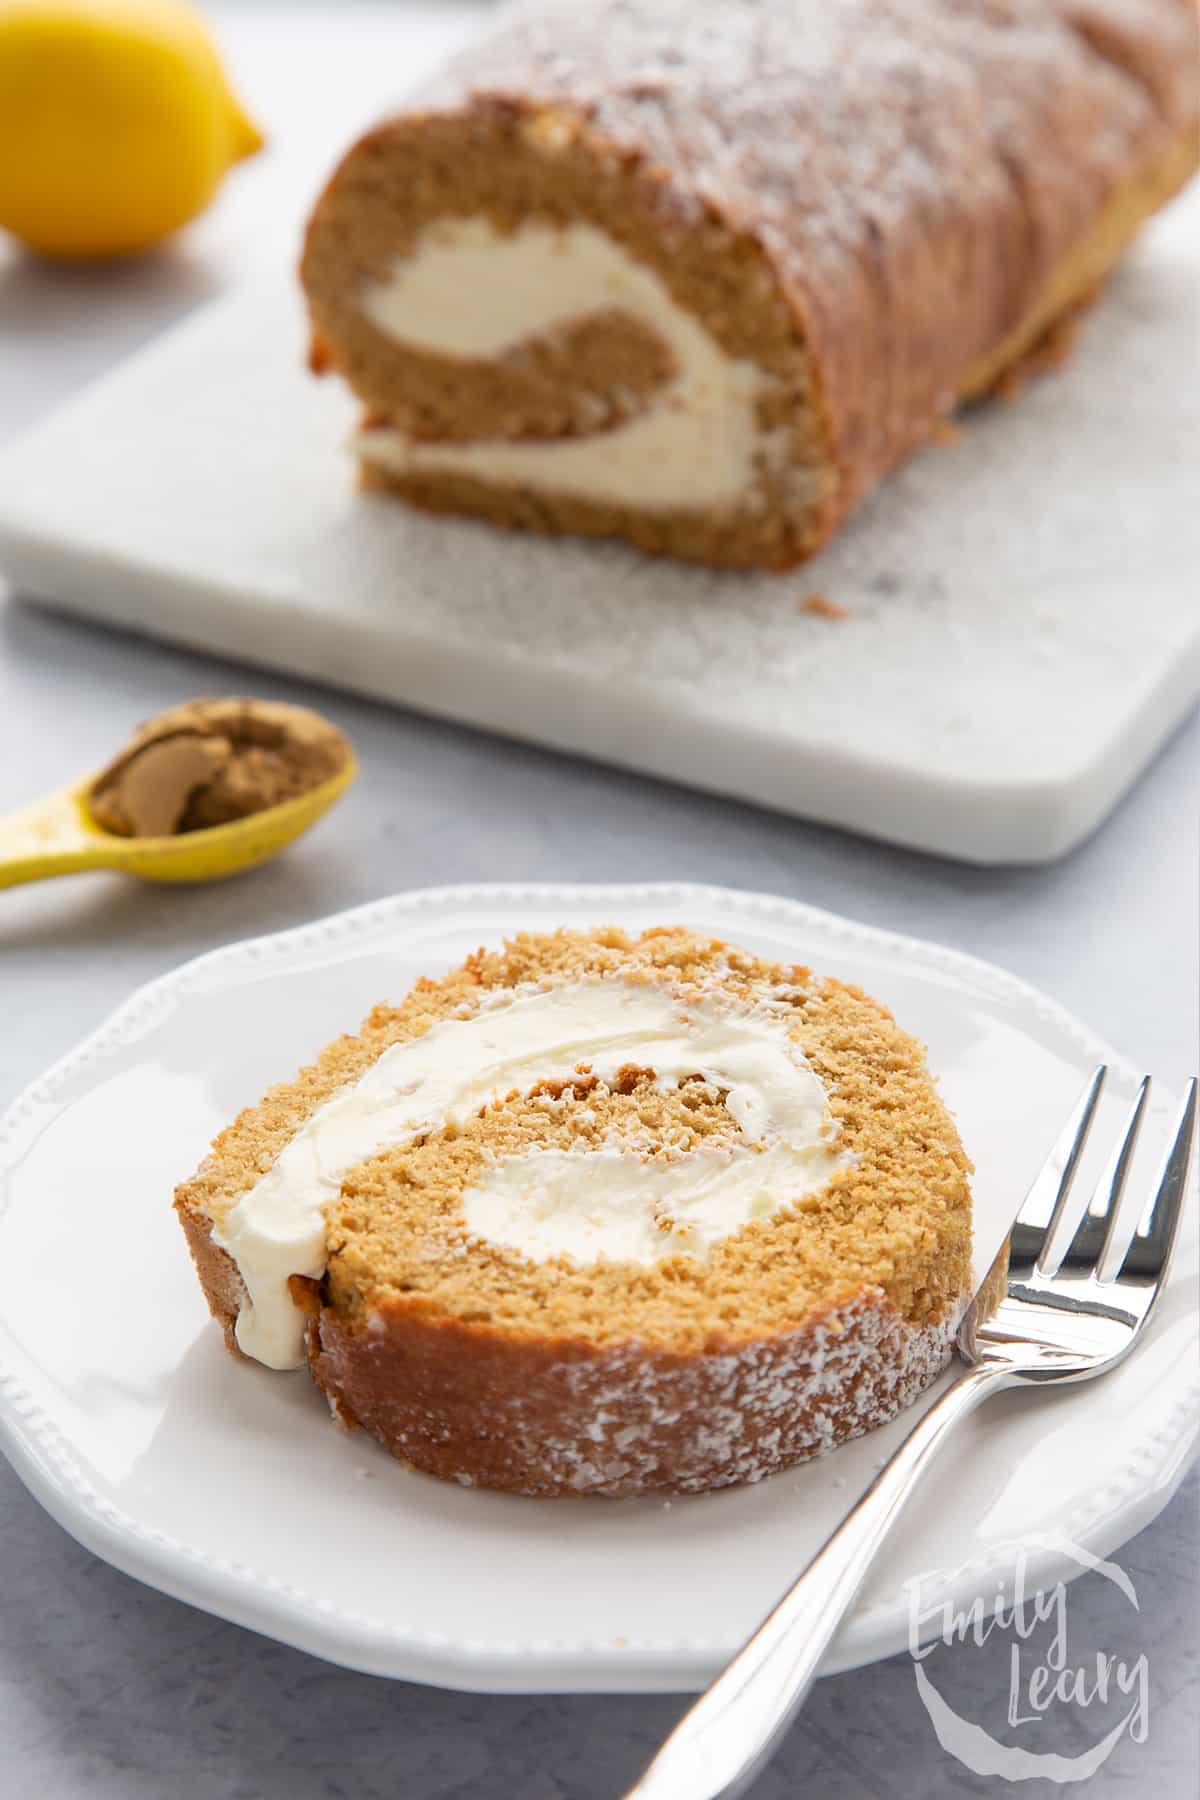 A slice of gingerbread Swiss roll on a white plate with a fork.